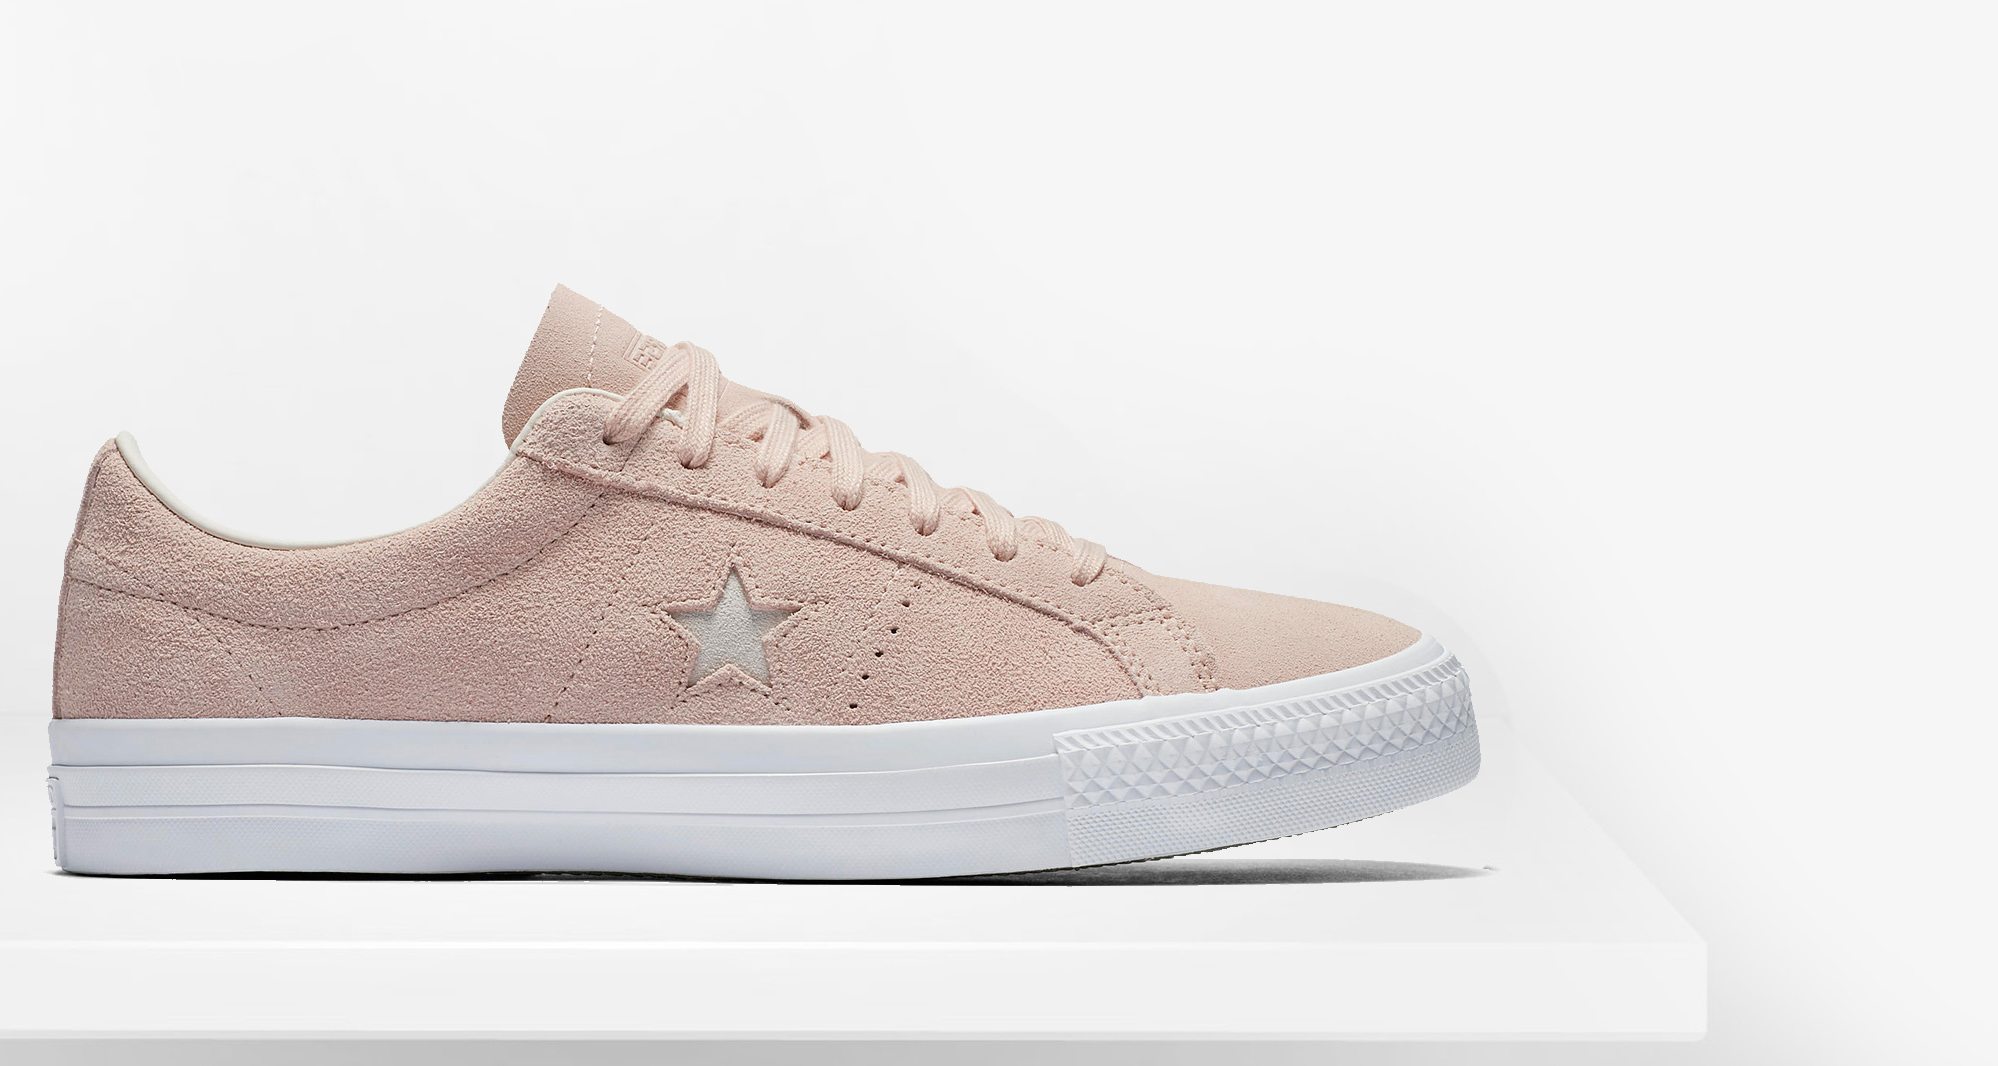 Converse One Star Pro Suede "Pink"